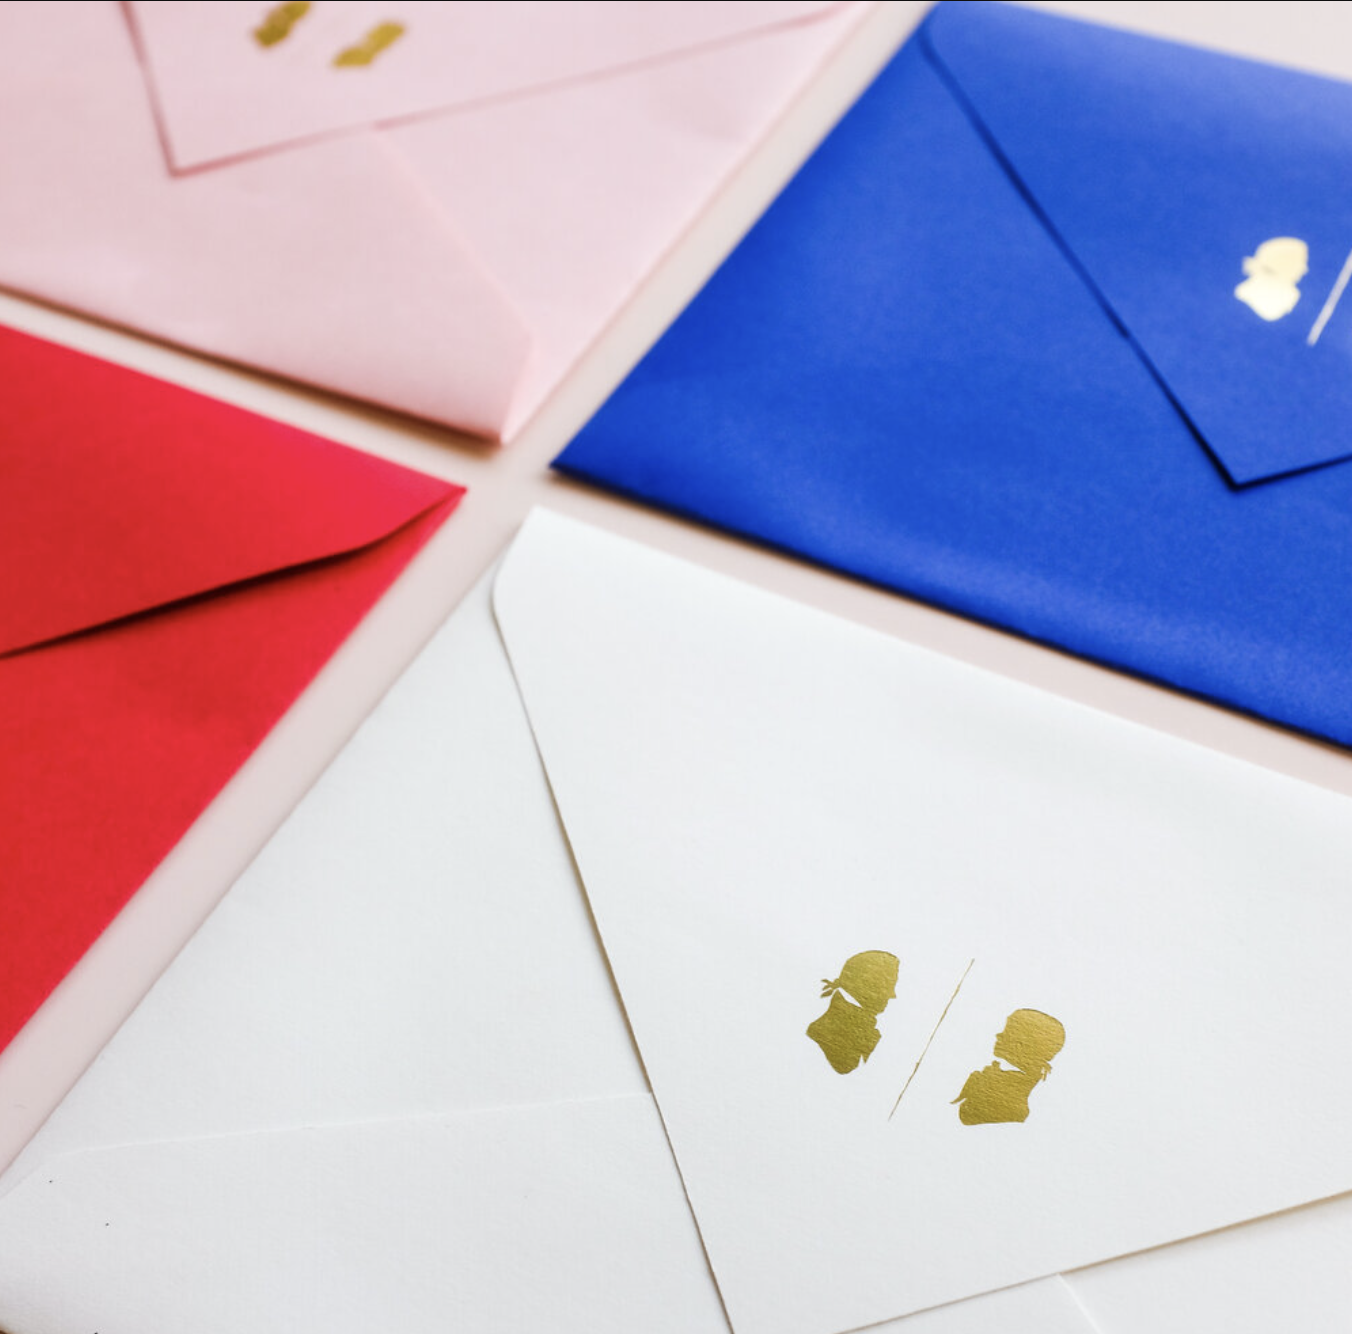 There are colored envelopes on a table.